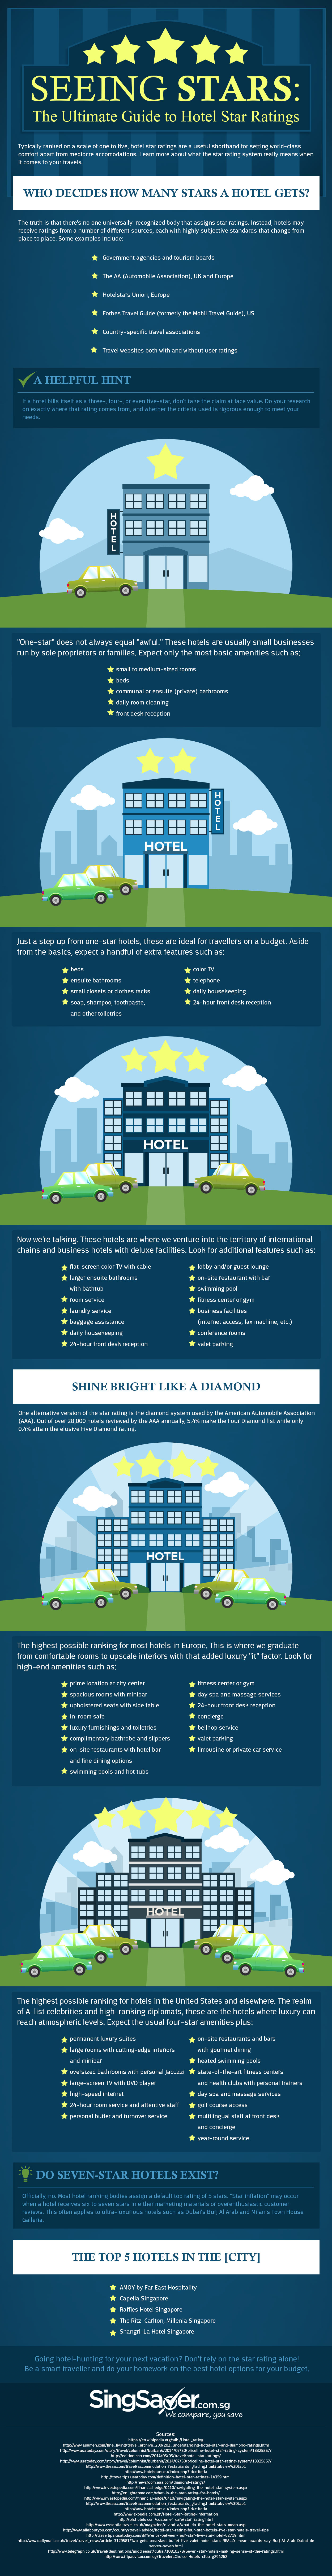 The Ultimate Guide to Hotel Star Ratings by SingSaver.com.sg